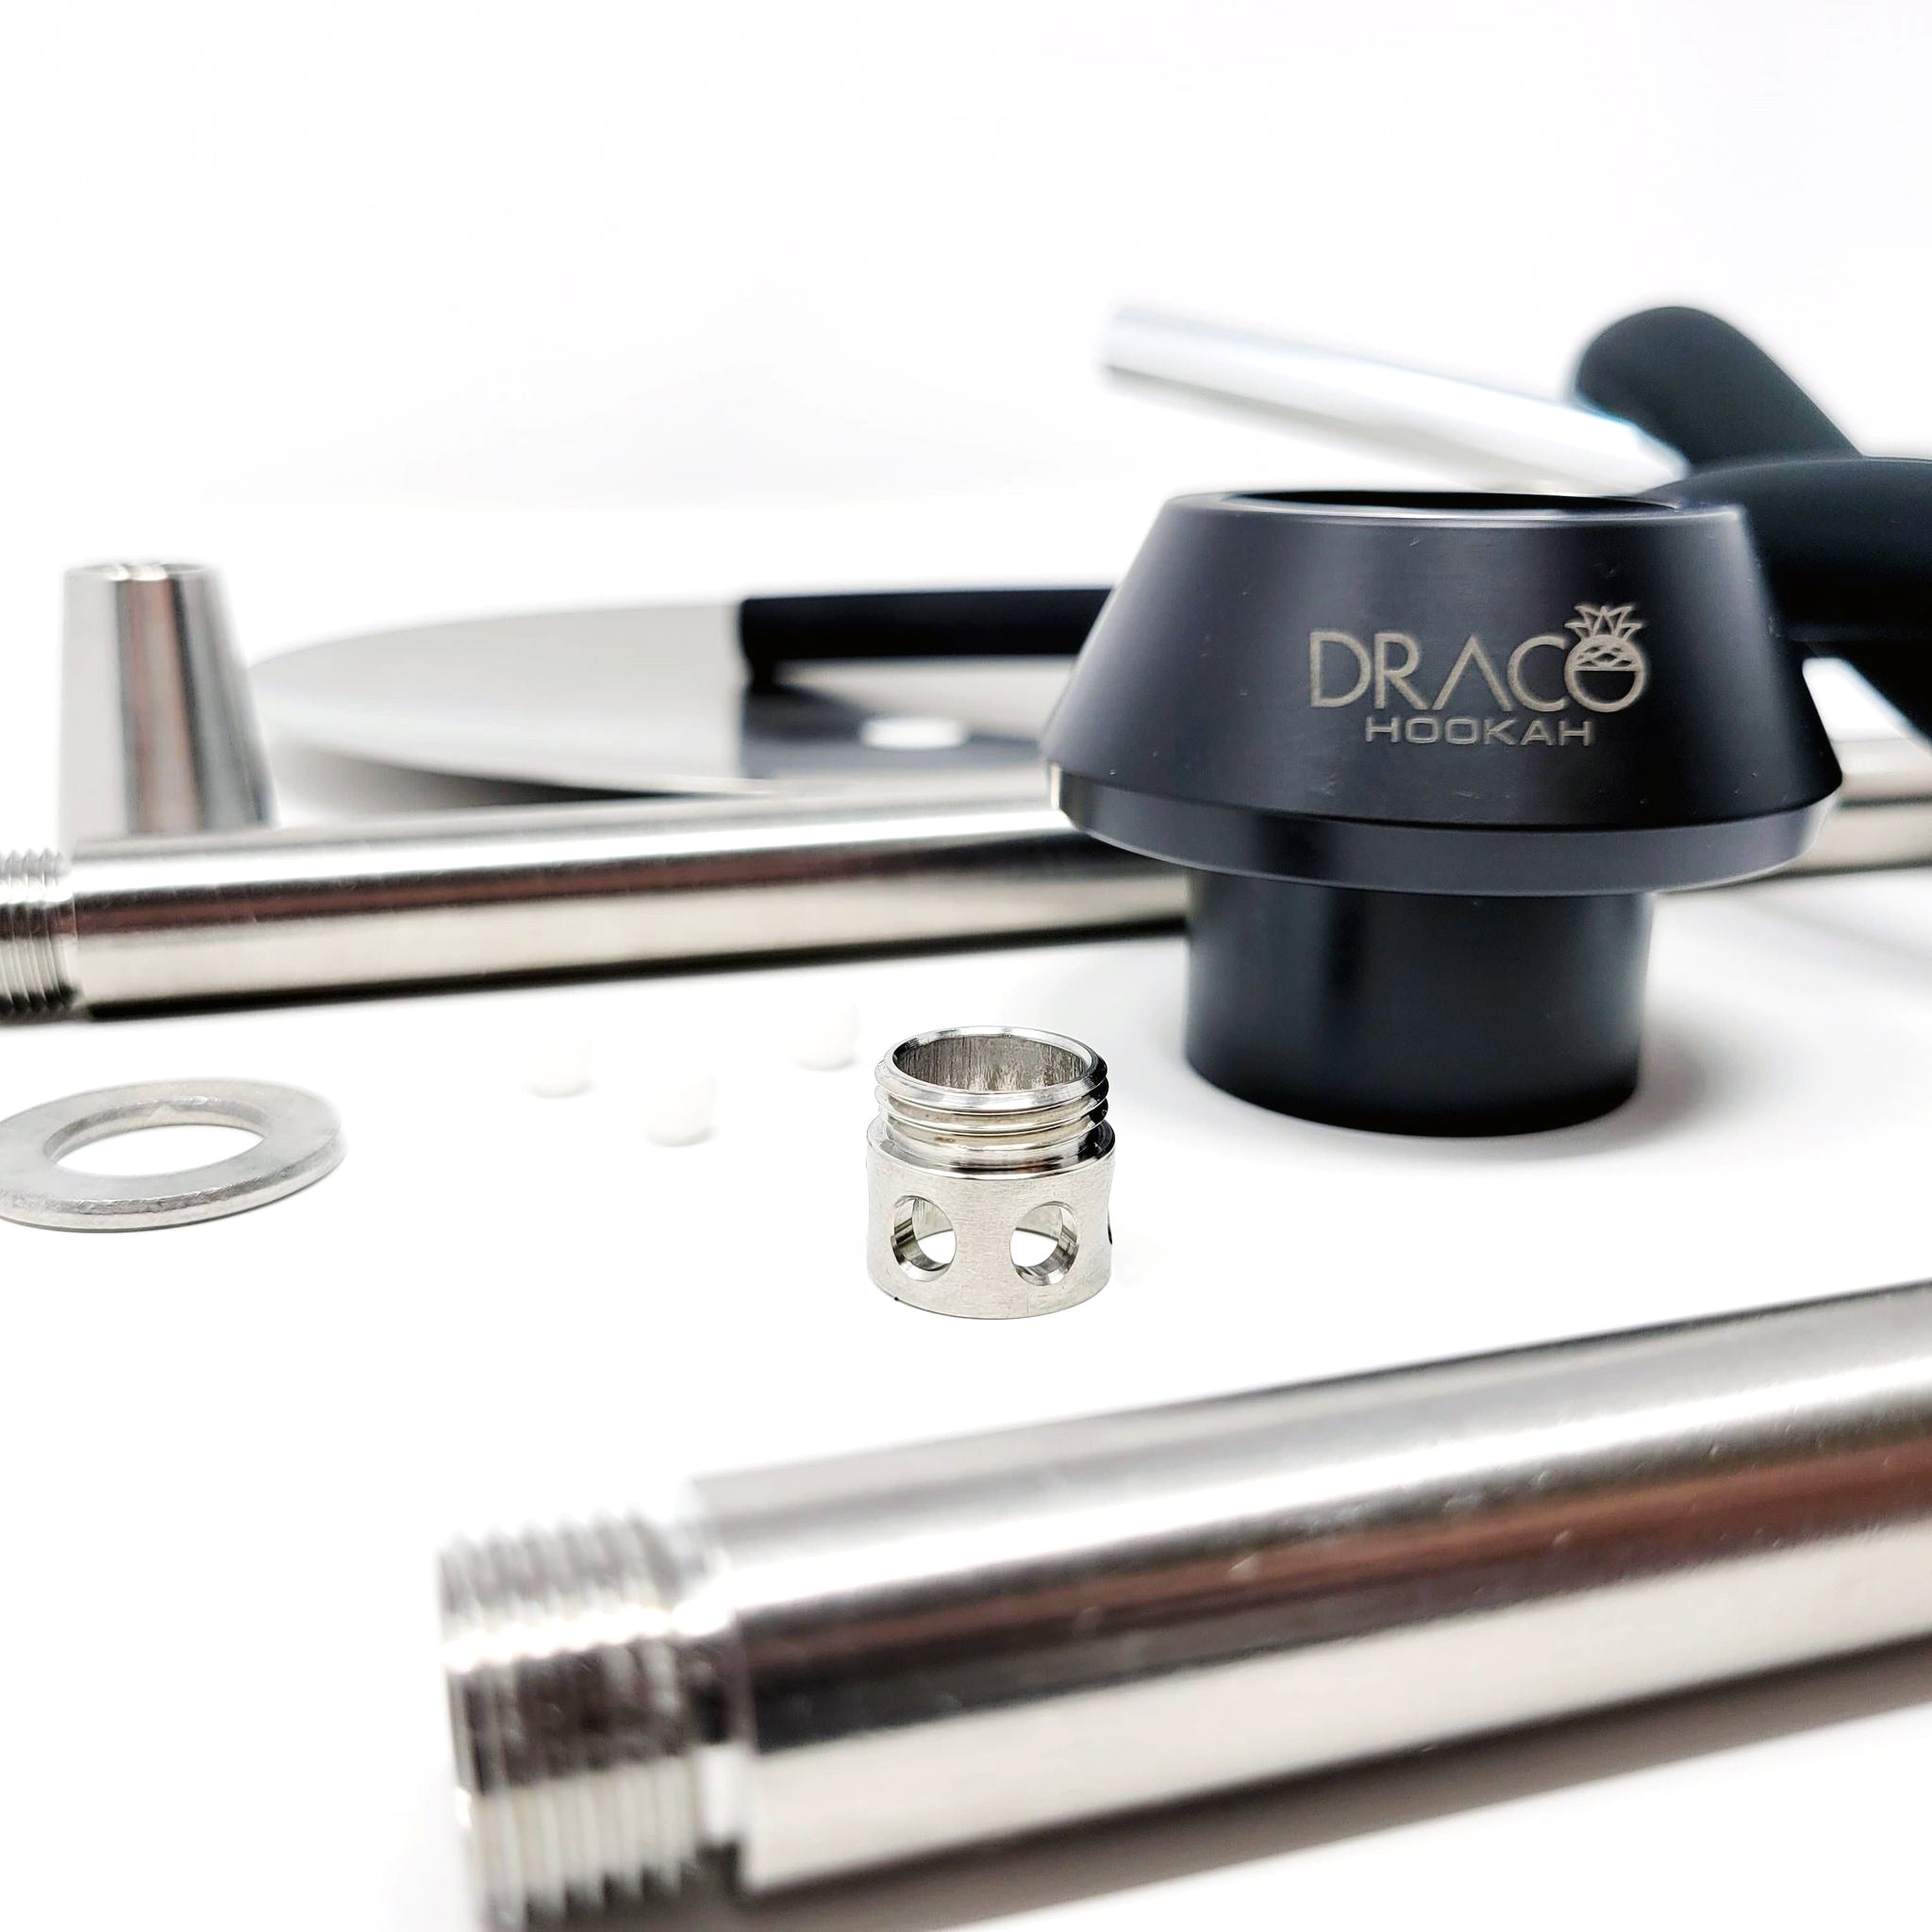 Draco Hookah Purgo - Stainless Steel Hookah with Diffuser, Tray, and Soft Touch Silicone Hose